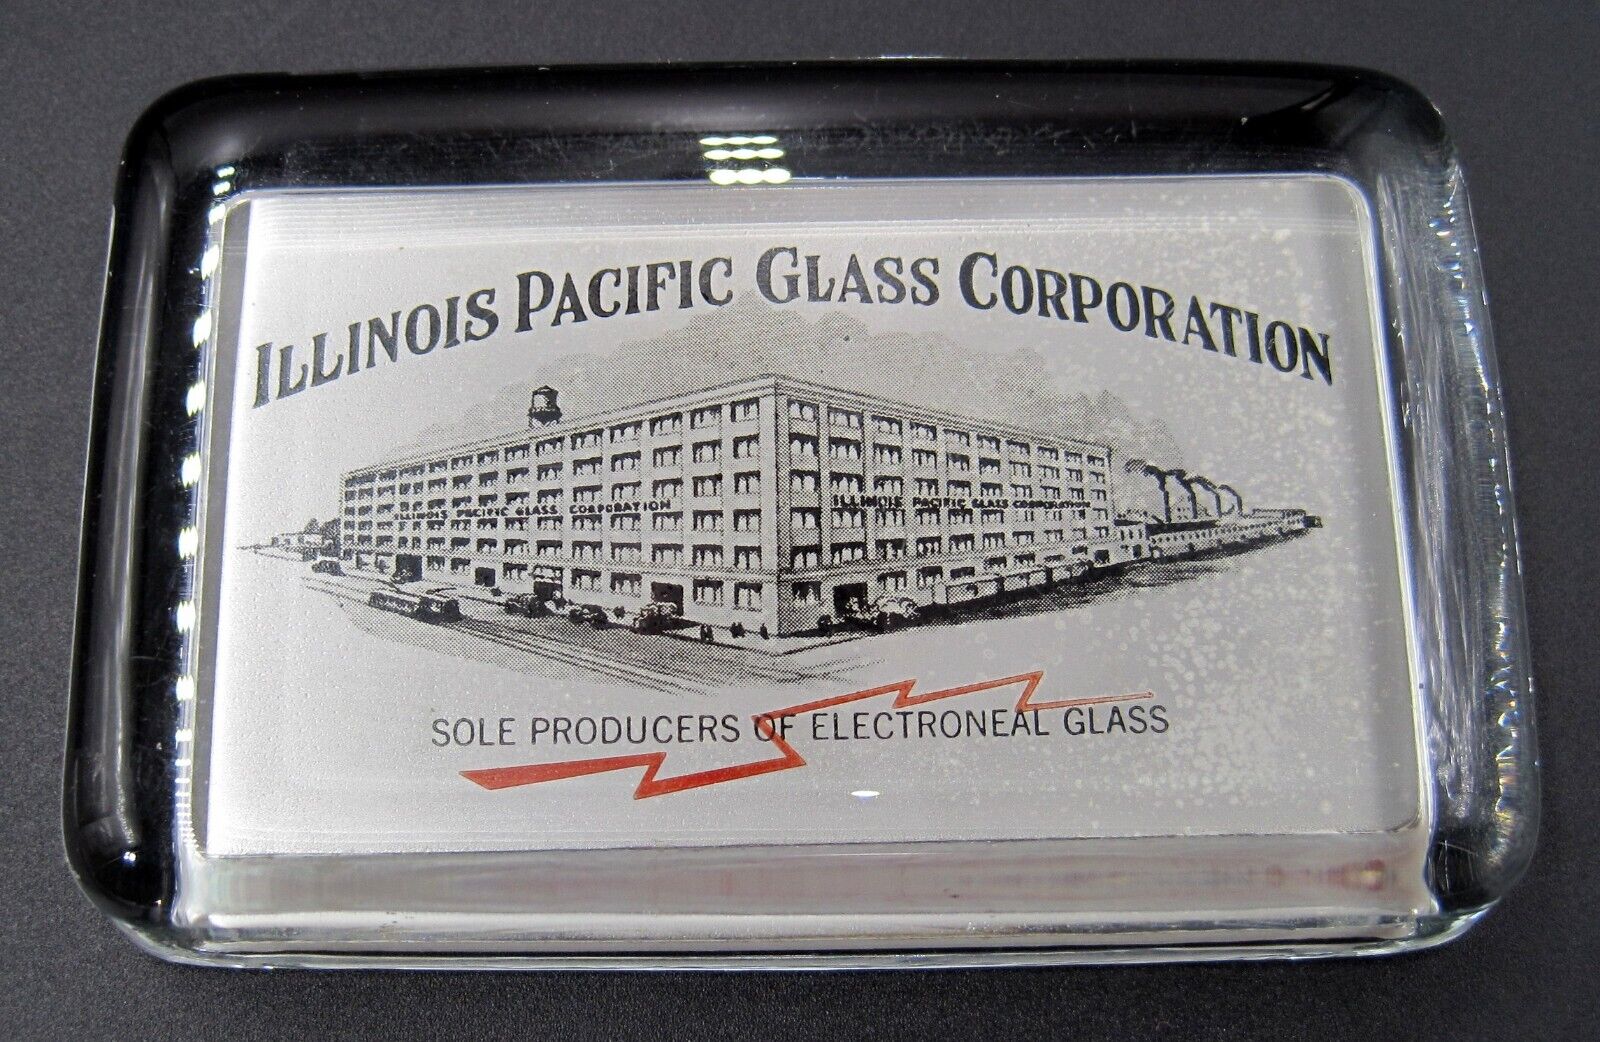 Stunning Vintage ILLINOIS PACIFIC GLASS CORPORATION HEADQUARTERS PAPERWEIGHT